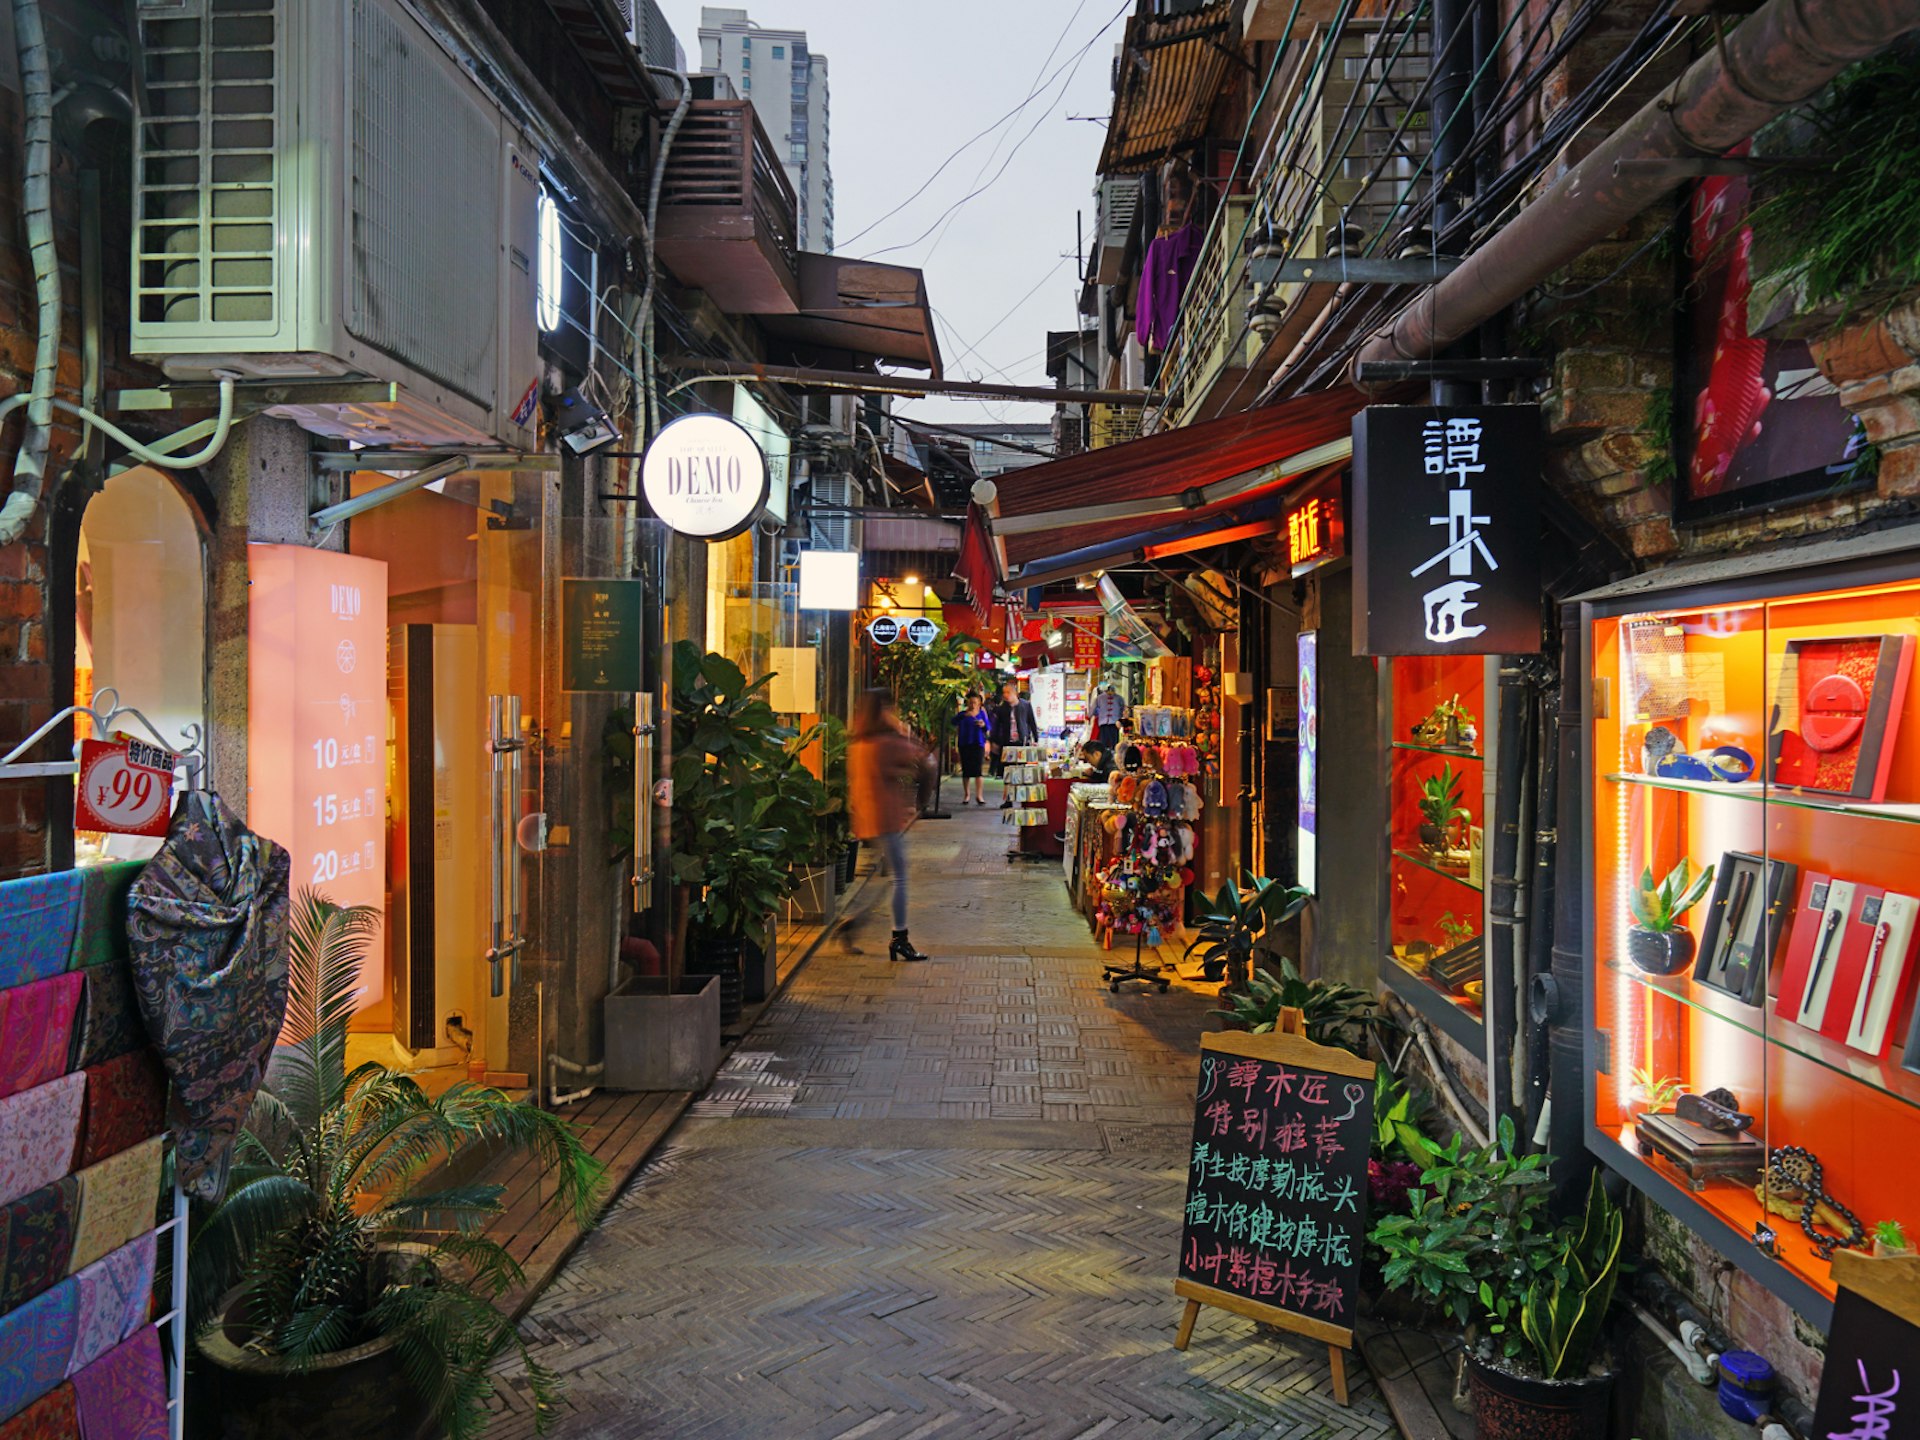 A view down a street in Shanghai's French Concession © EQRoy / Shutterstock